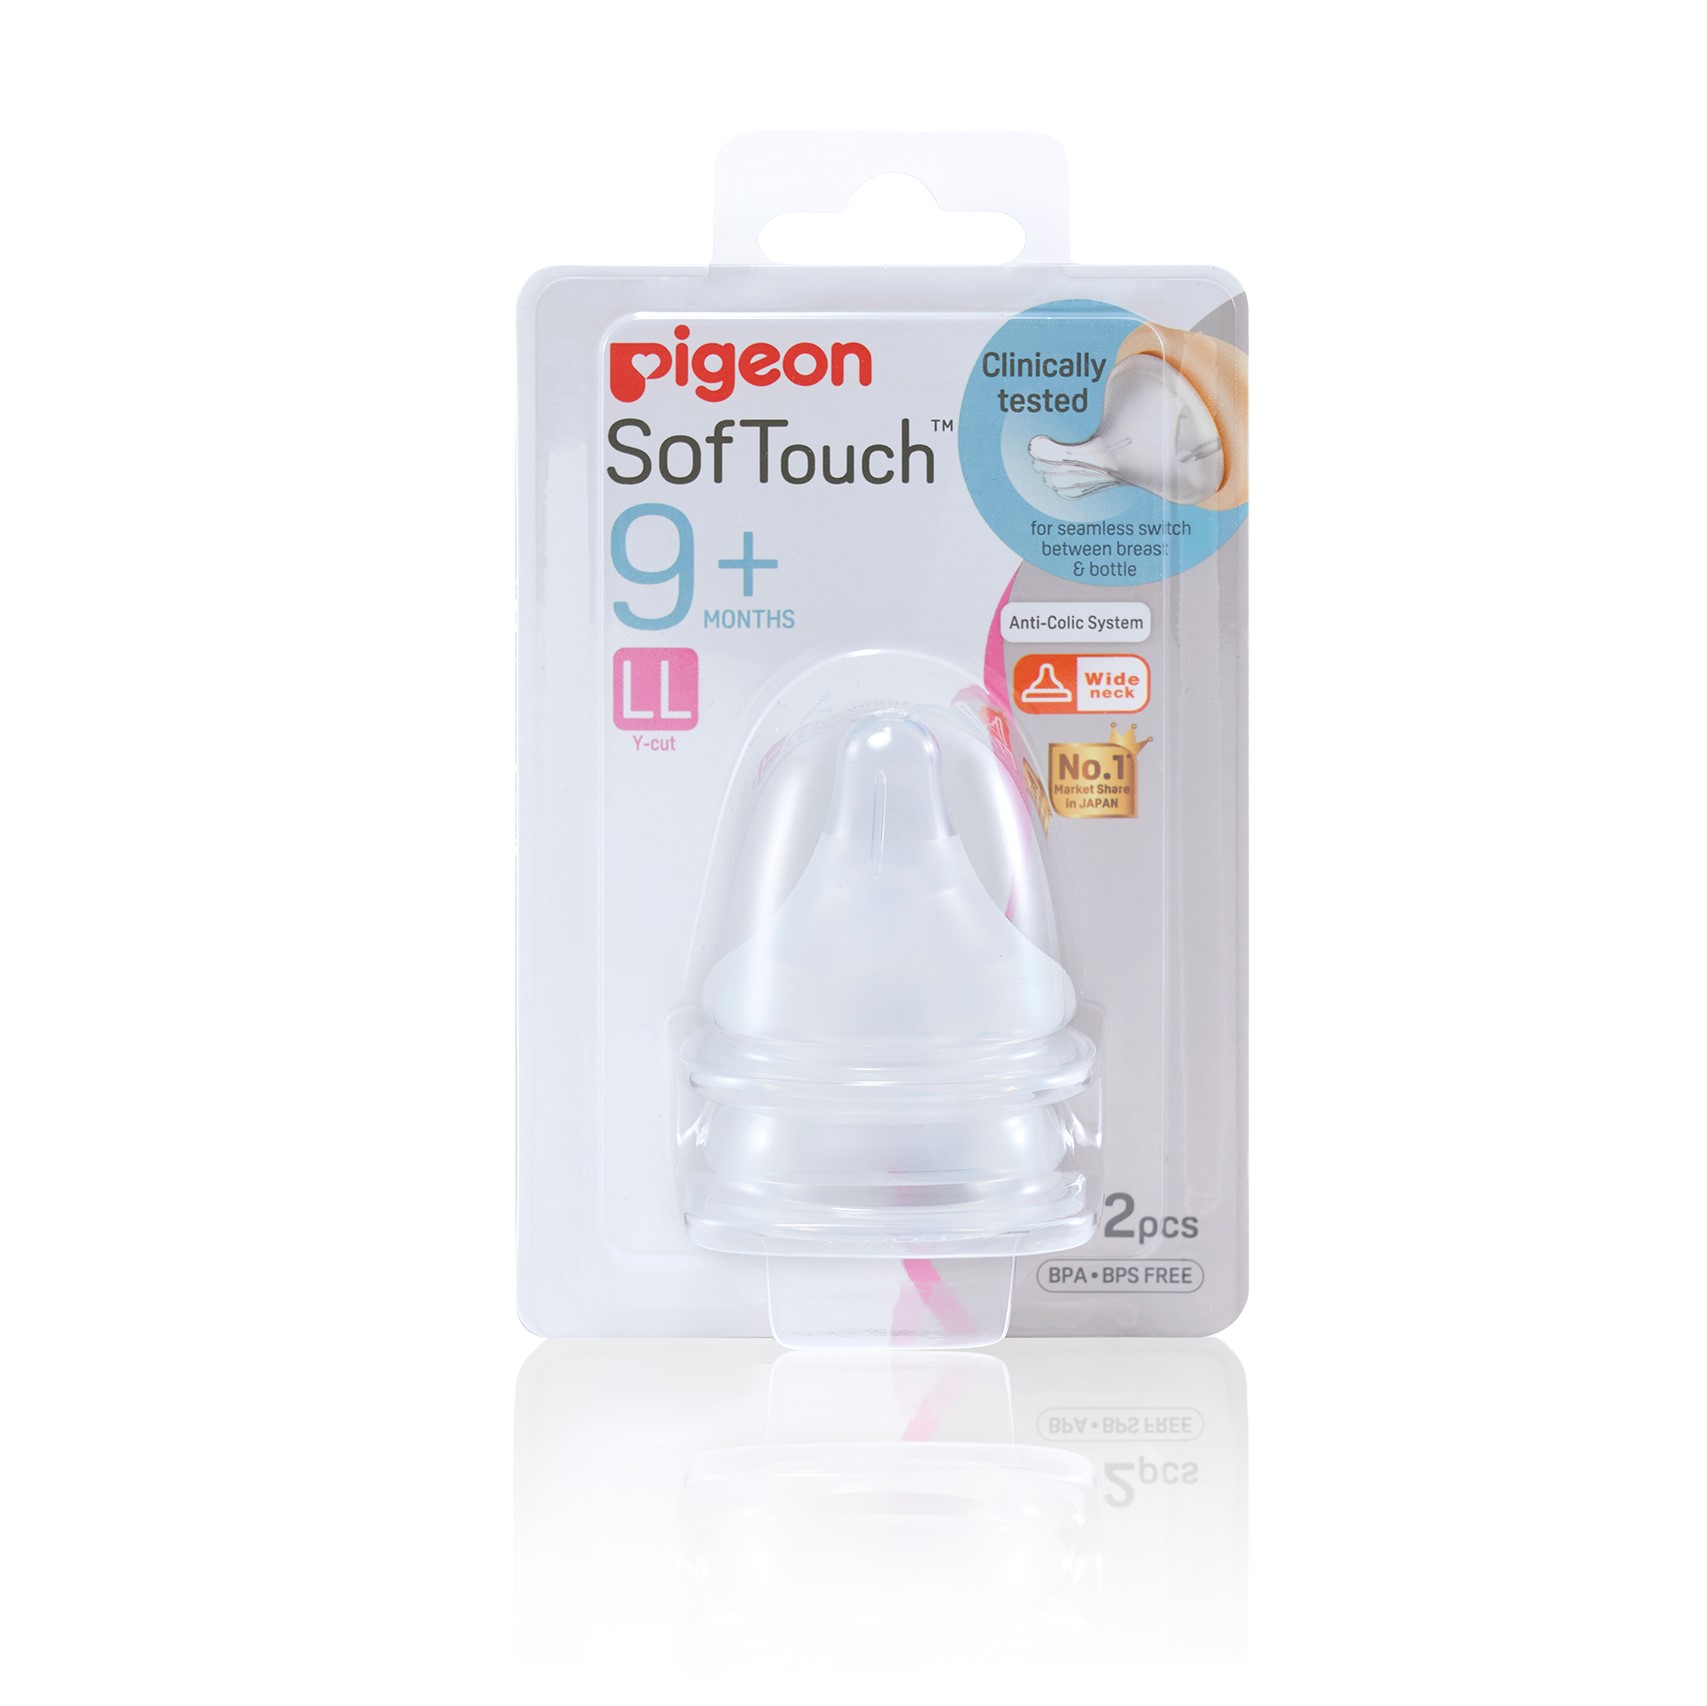 Pigeon SofTouch Nipple Blister Pack 2Pcs (LL) (PG-78482)